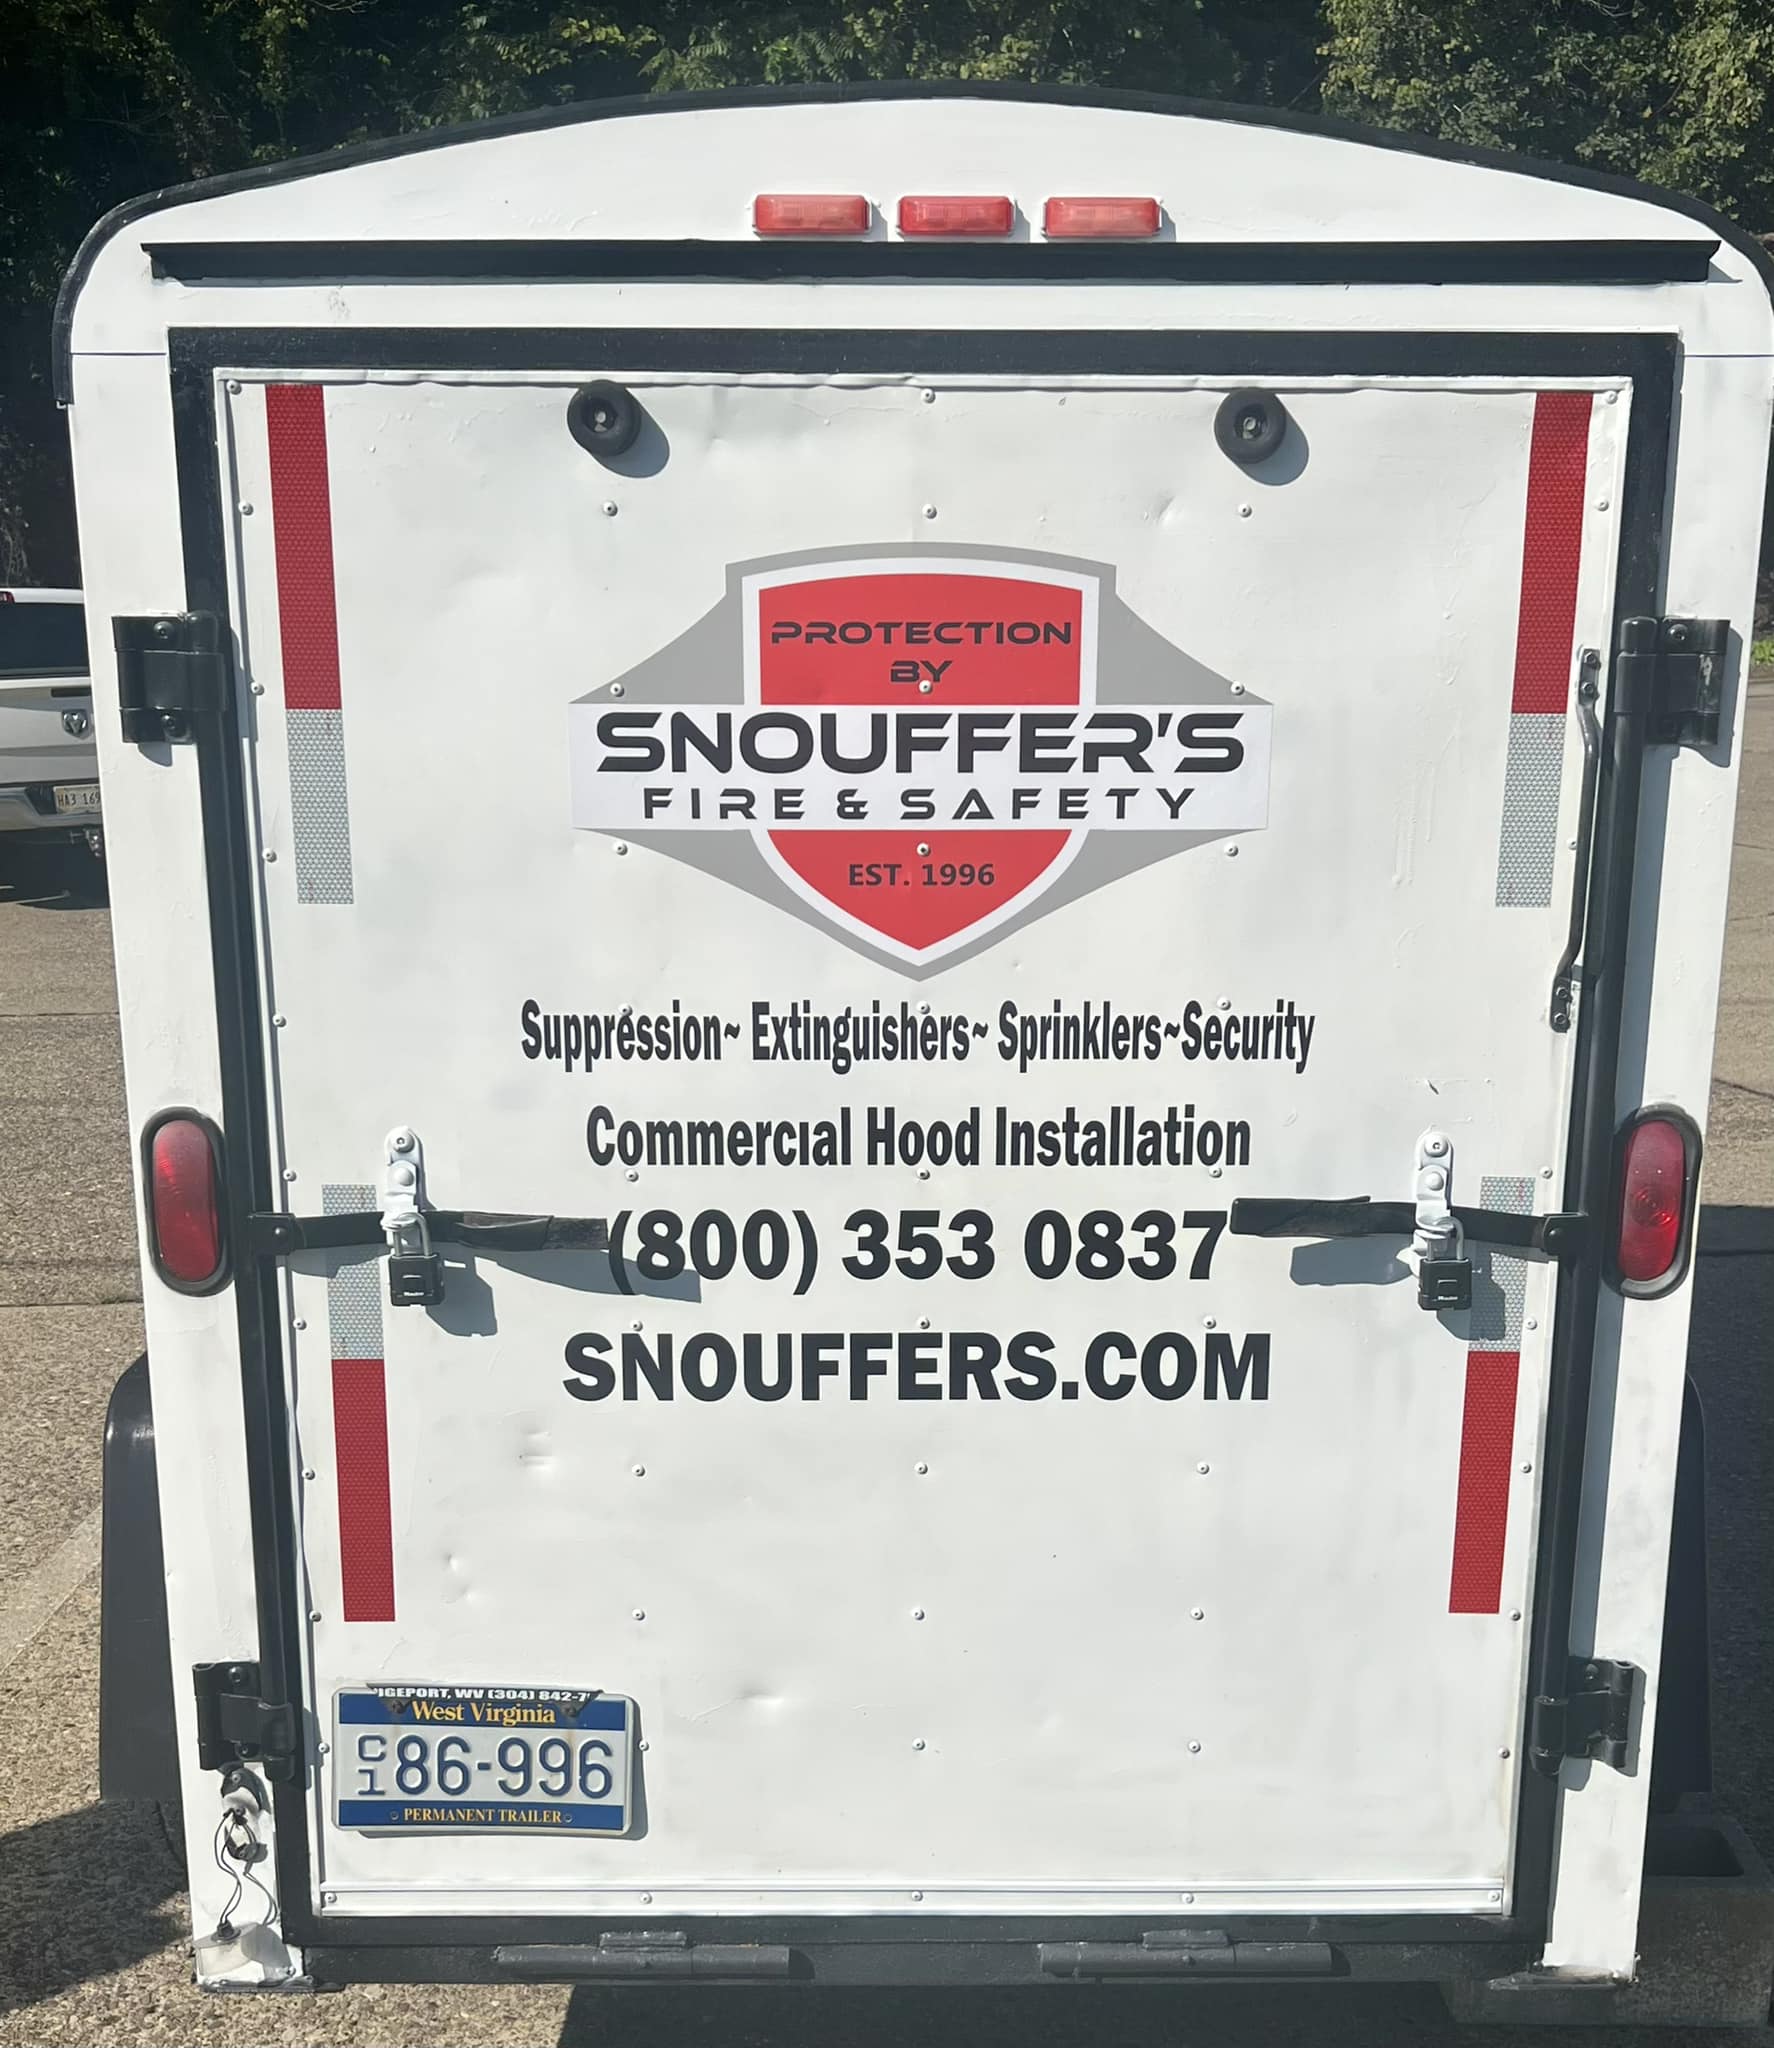 Snouffer's Fire & Safety 172 N 2nd Ave, Middleport Ohio 45760